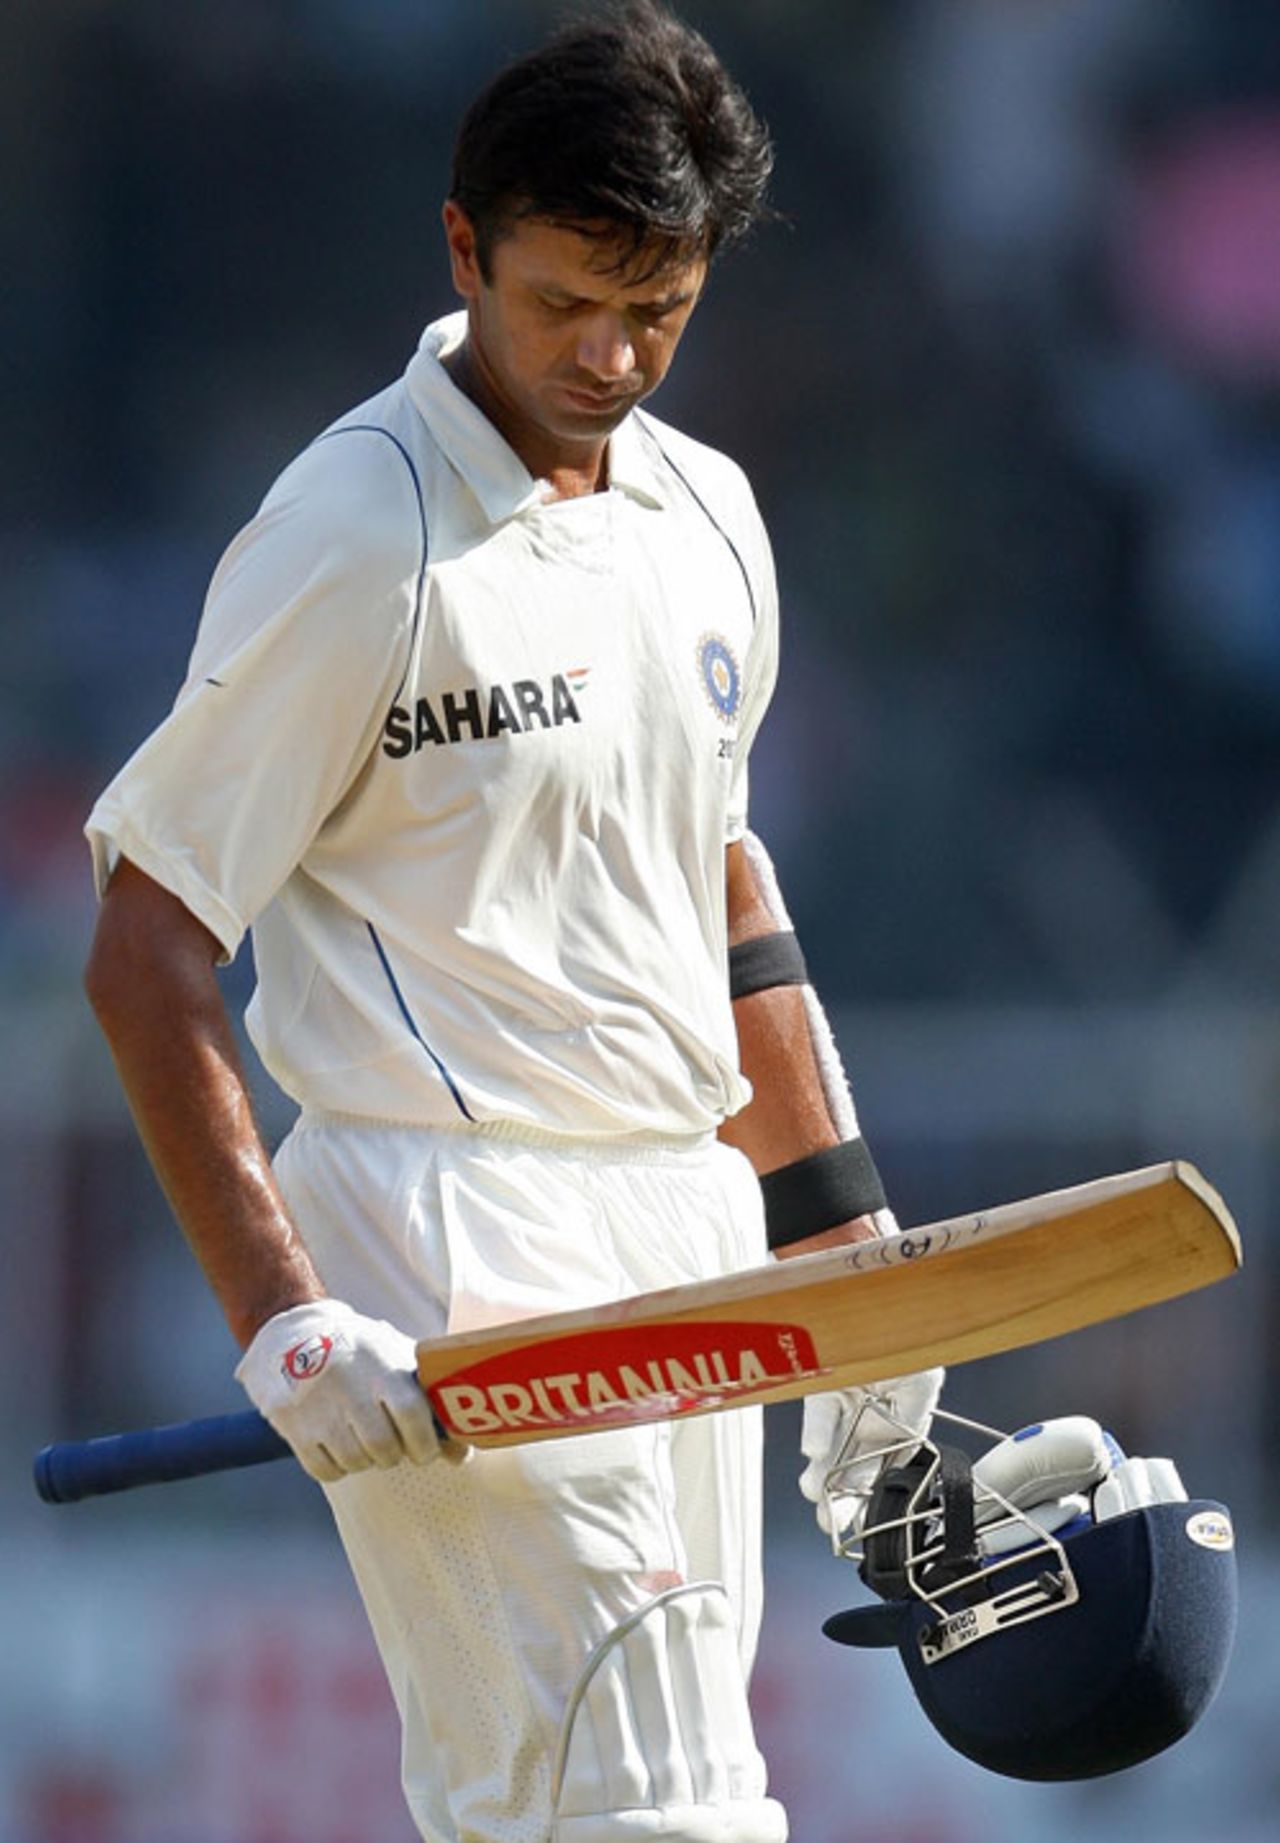 The disappointment is writ large on Rahul Dravid's face as his miserable run continues, India v England, 1st Test, Chennai, 5th day, December 15, 2008